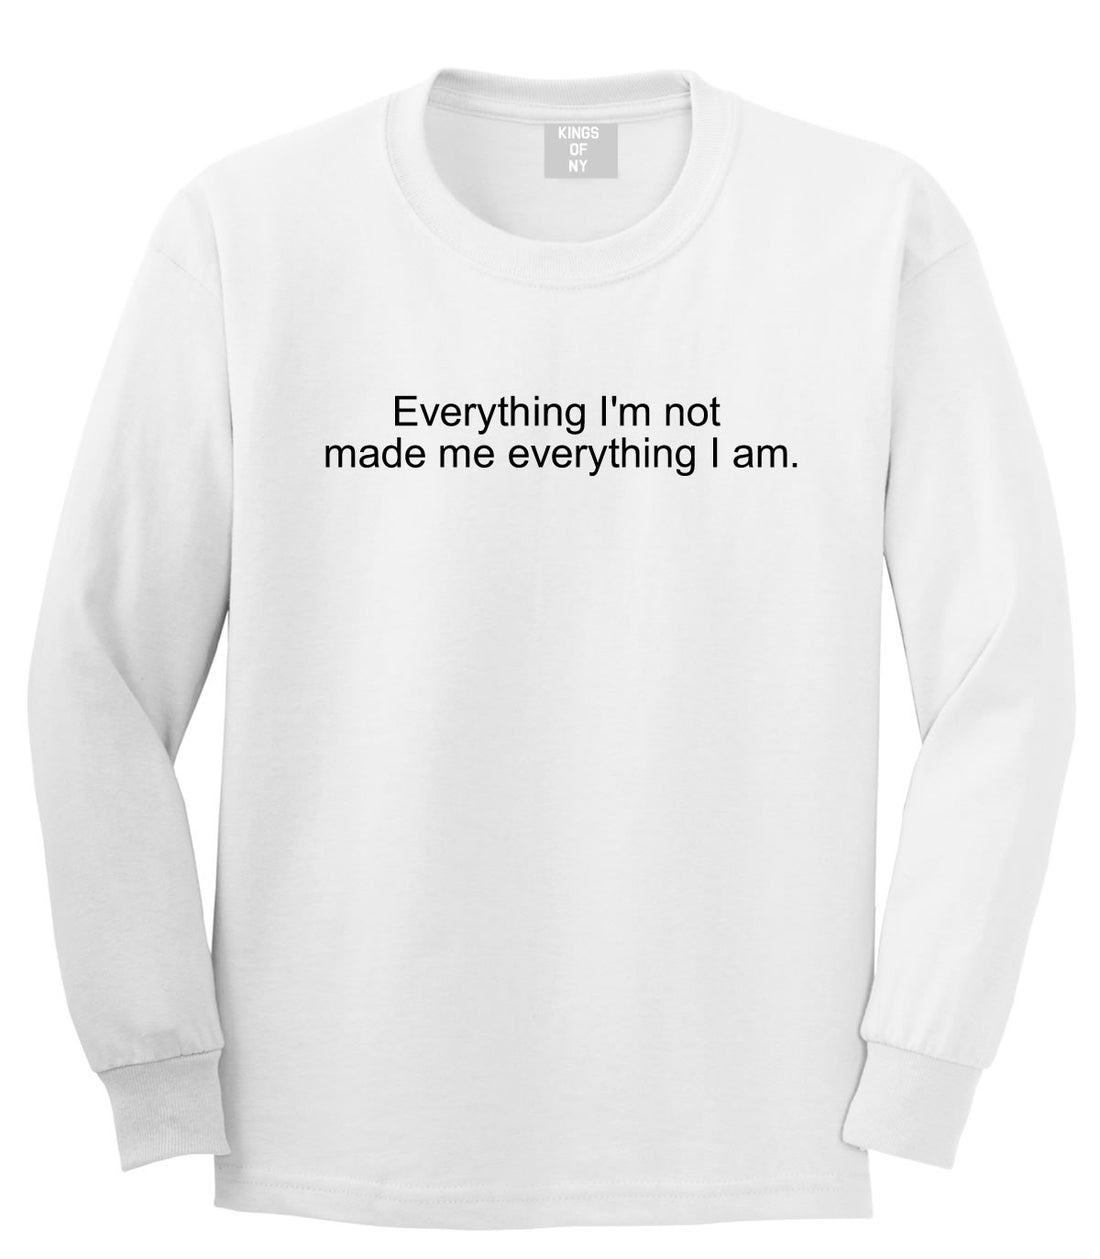 Everything Im Not Made Me Everything I am Long Sleeve T-Shirt in White By Kings Of NY